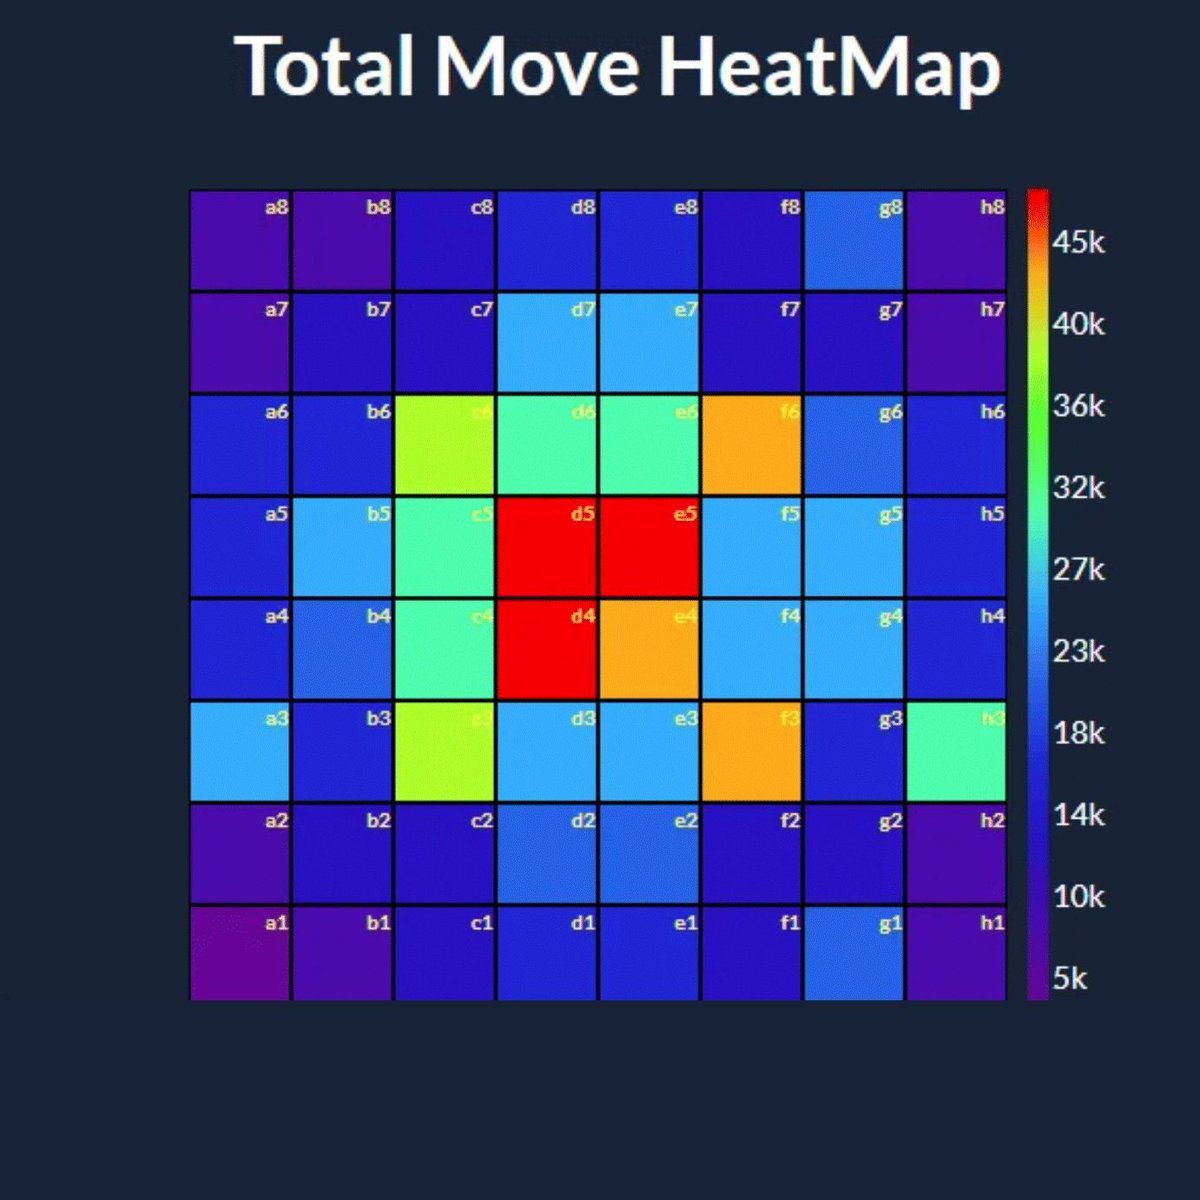 Chessboard heatmap. Most landed-upon squares. Analysis of 20,000 games. (via reddit.com/r/dataisbeauti…)